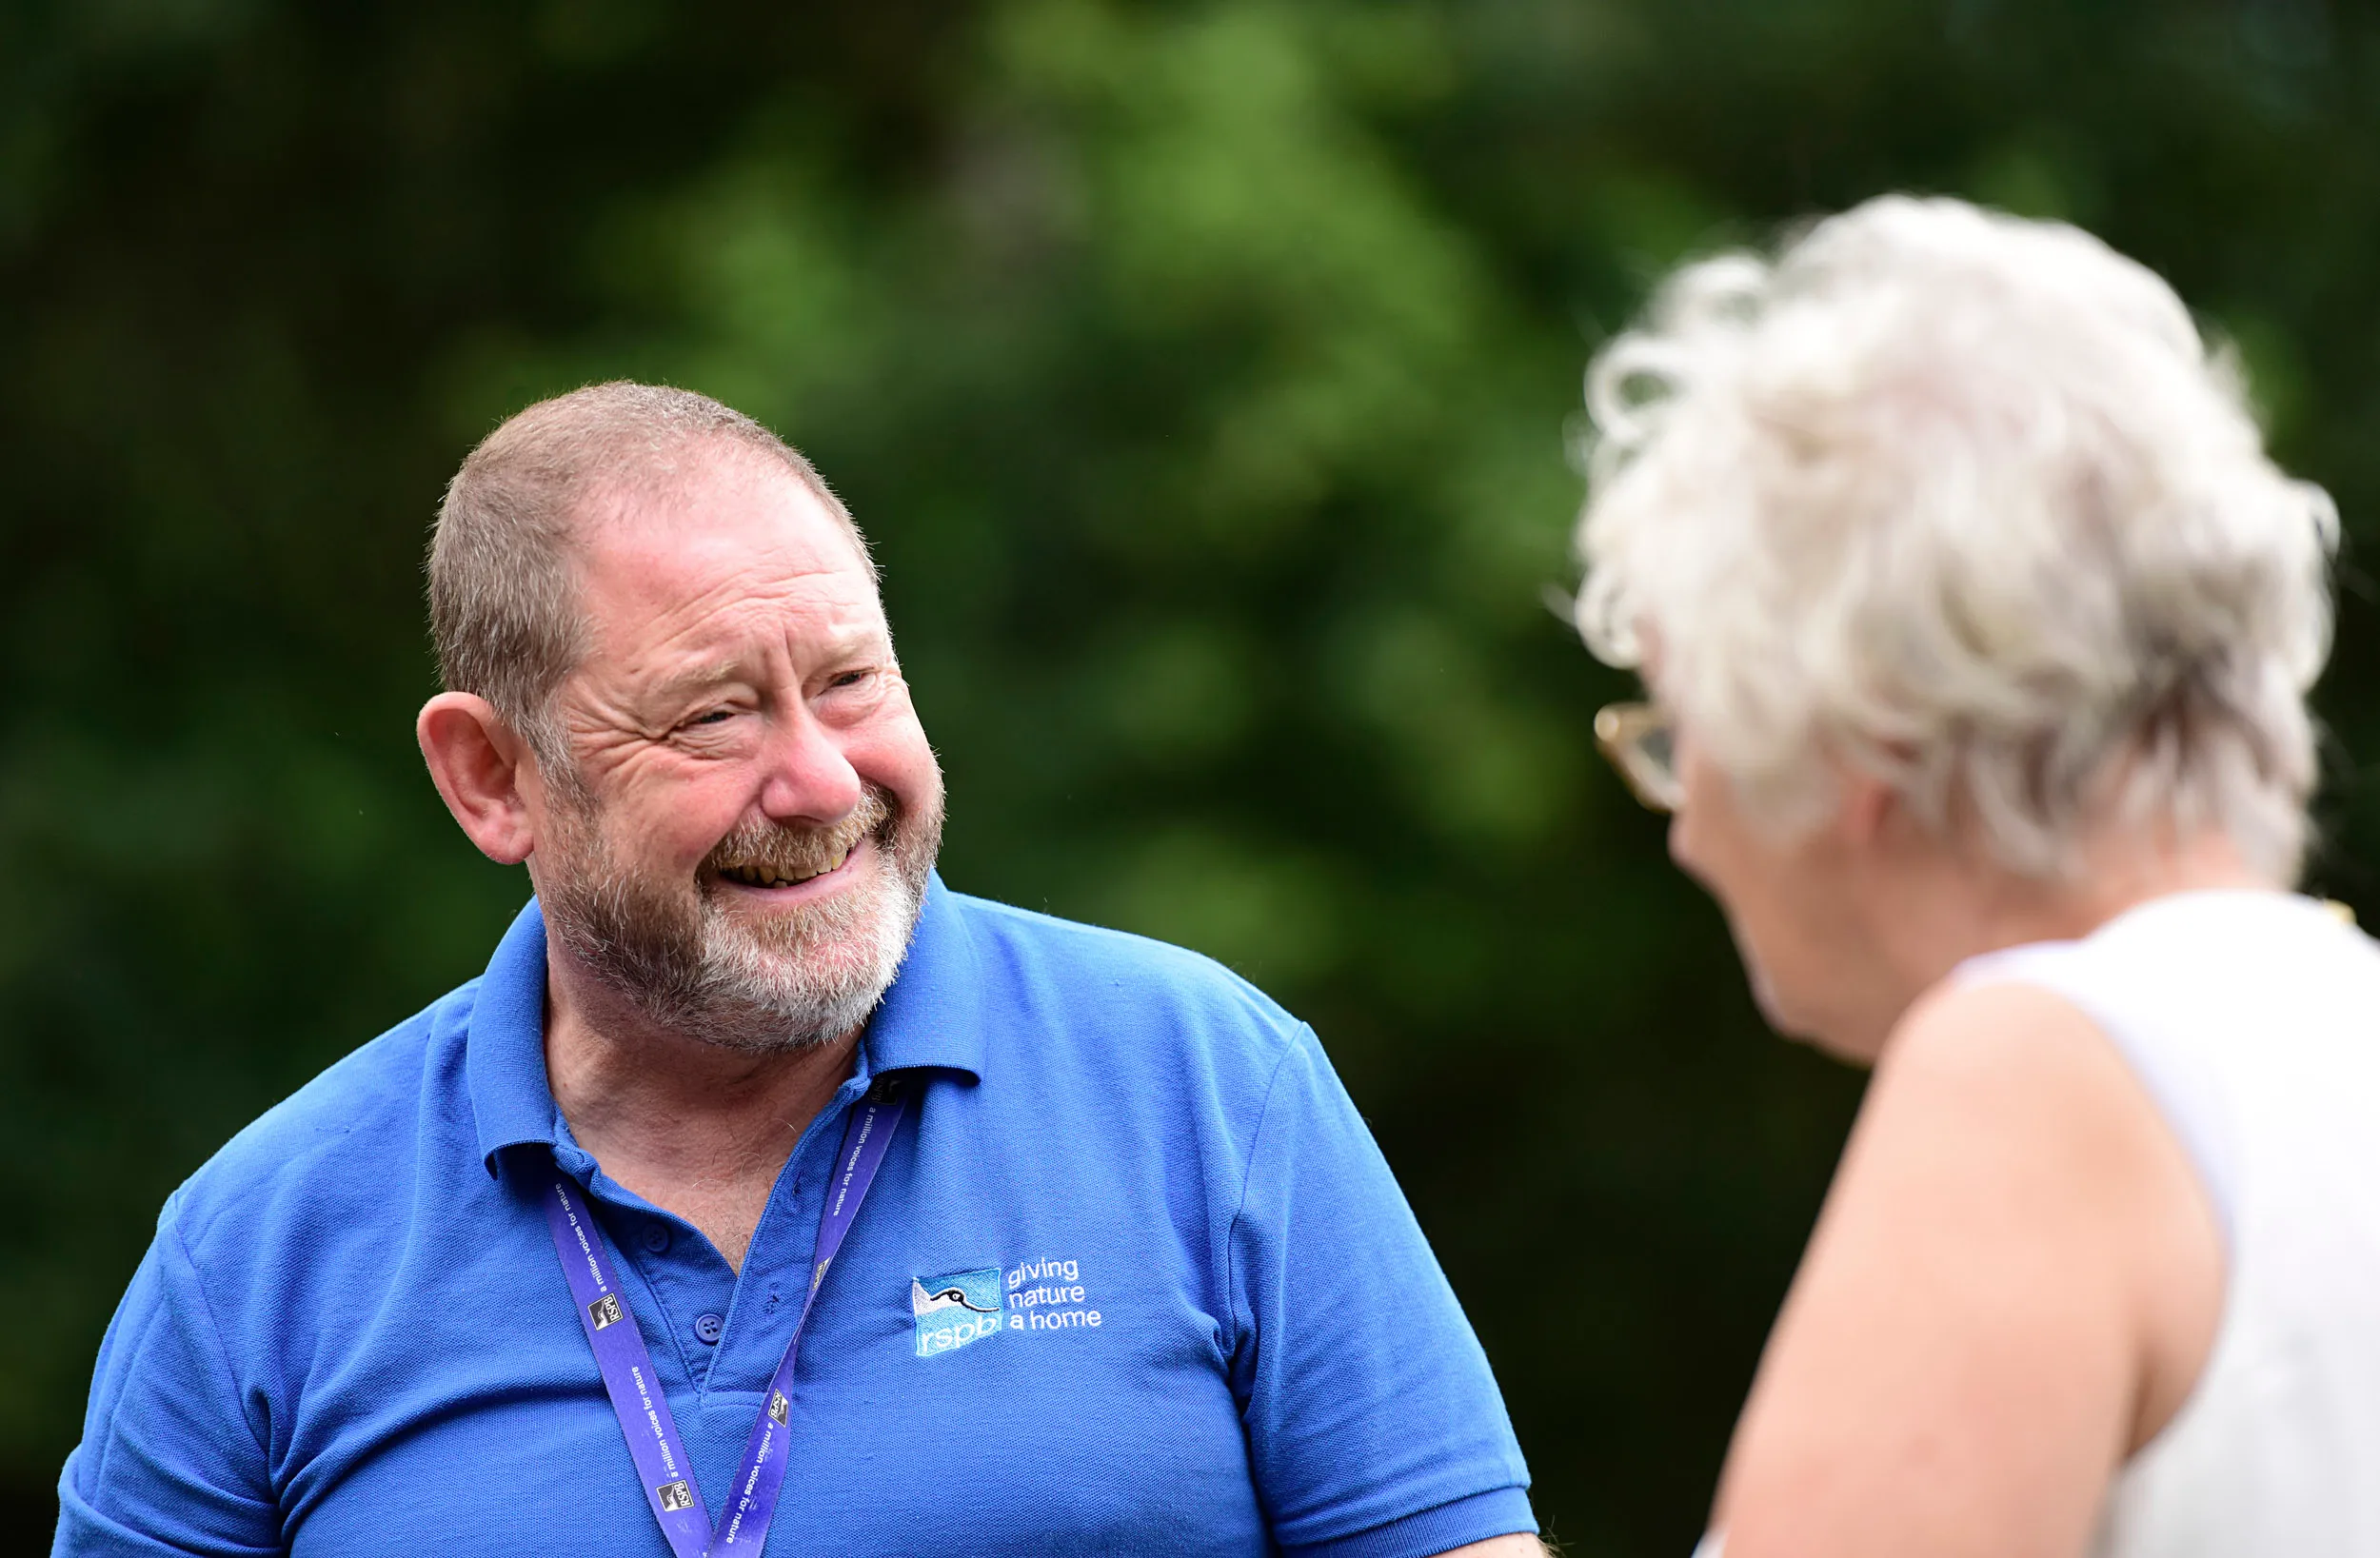 A member of RSPB staff talking to a member of the public with trees in the background.